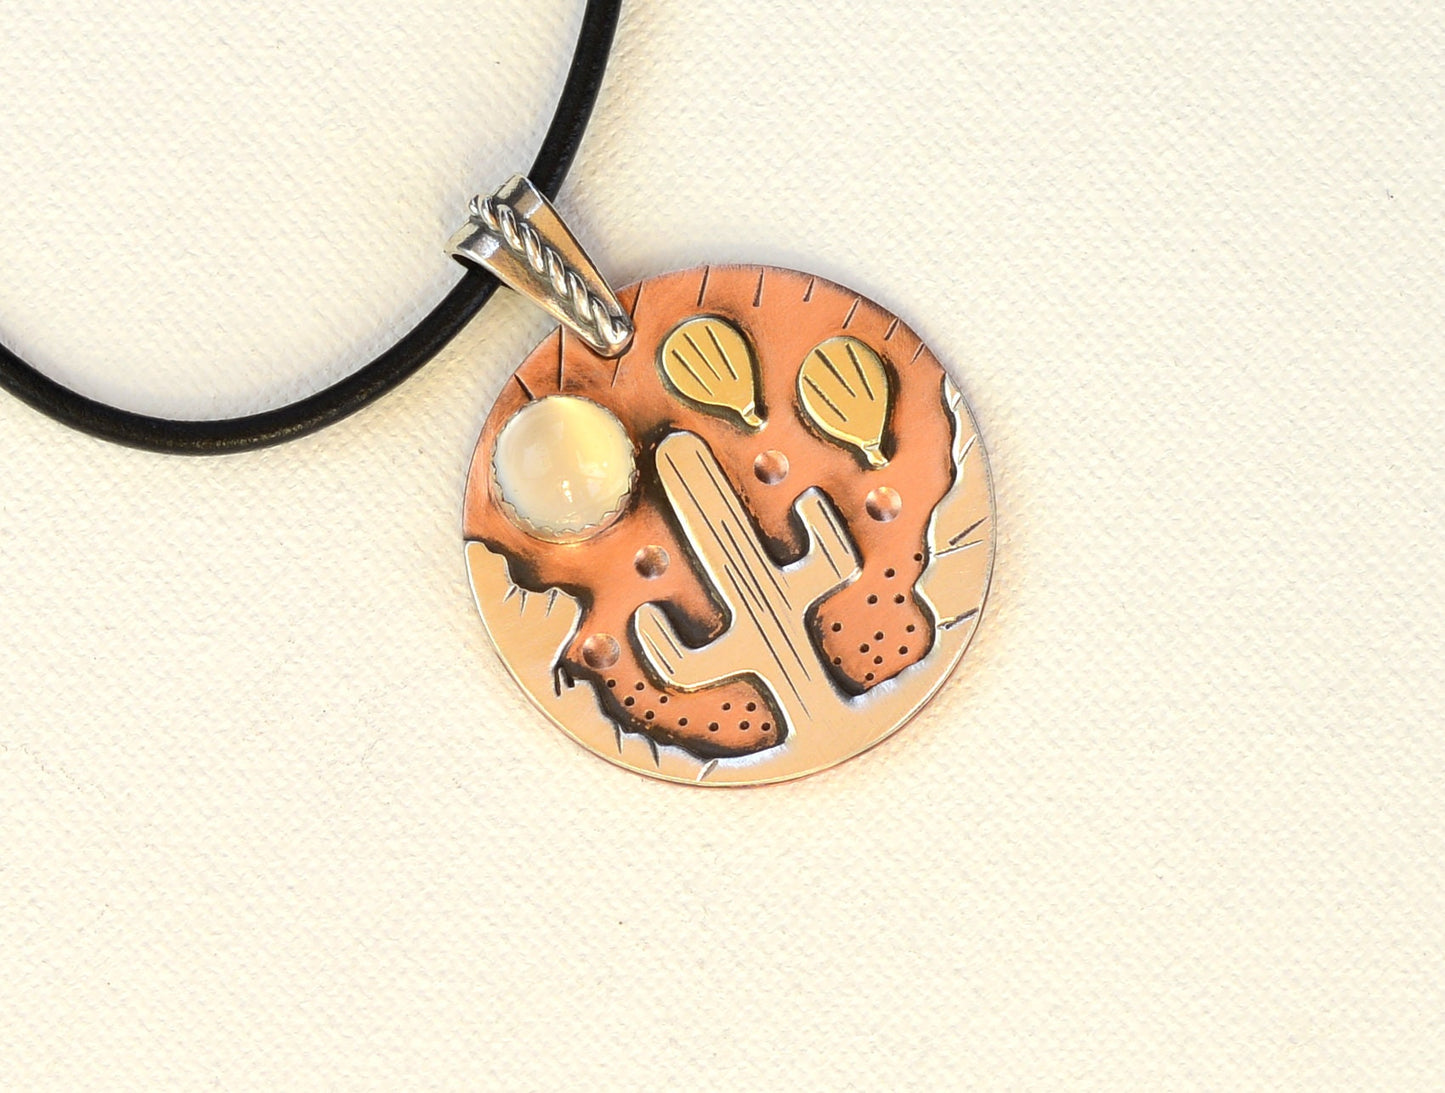 Necklace with Ballooning over the Desert theme